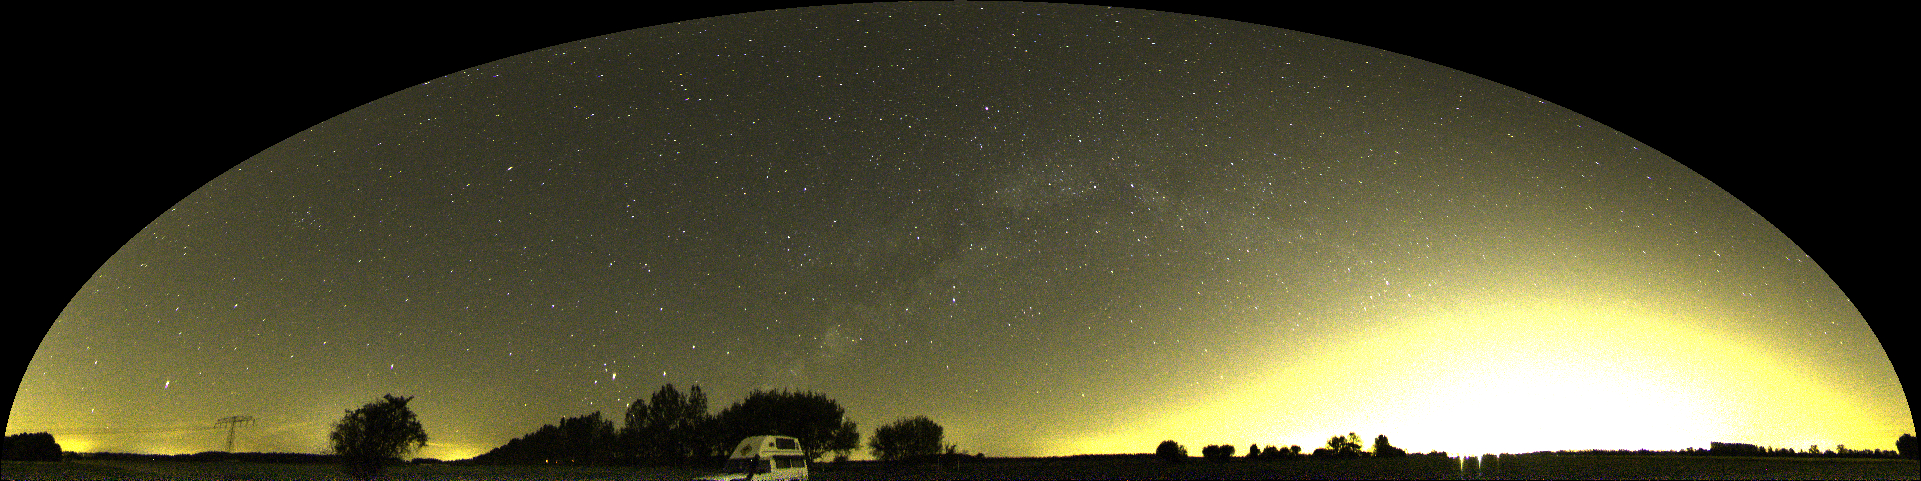 The Majority Of Americans Can’t See The Milky Way Anymore, But Australians Can See It Fine